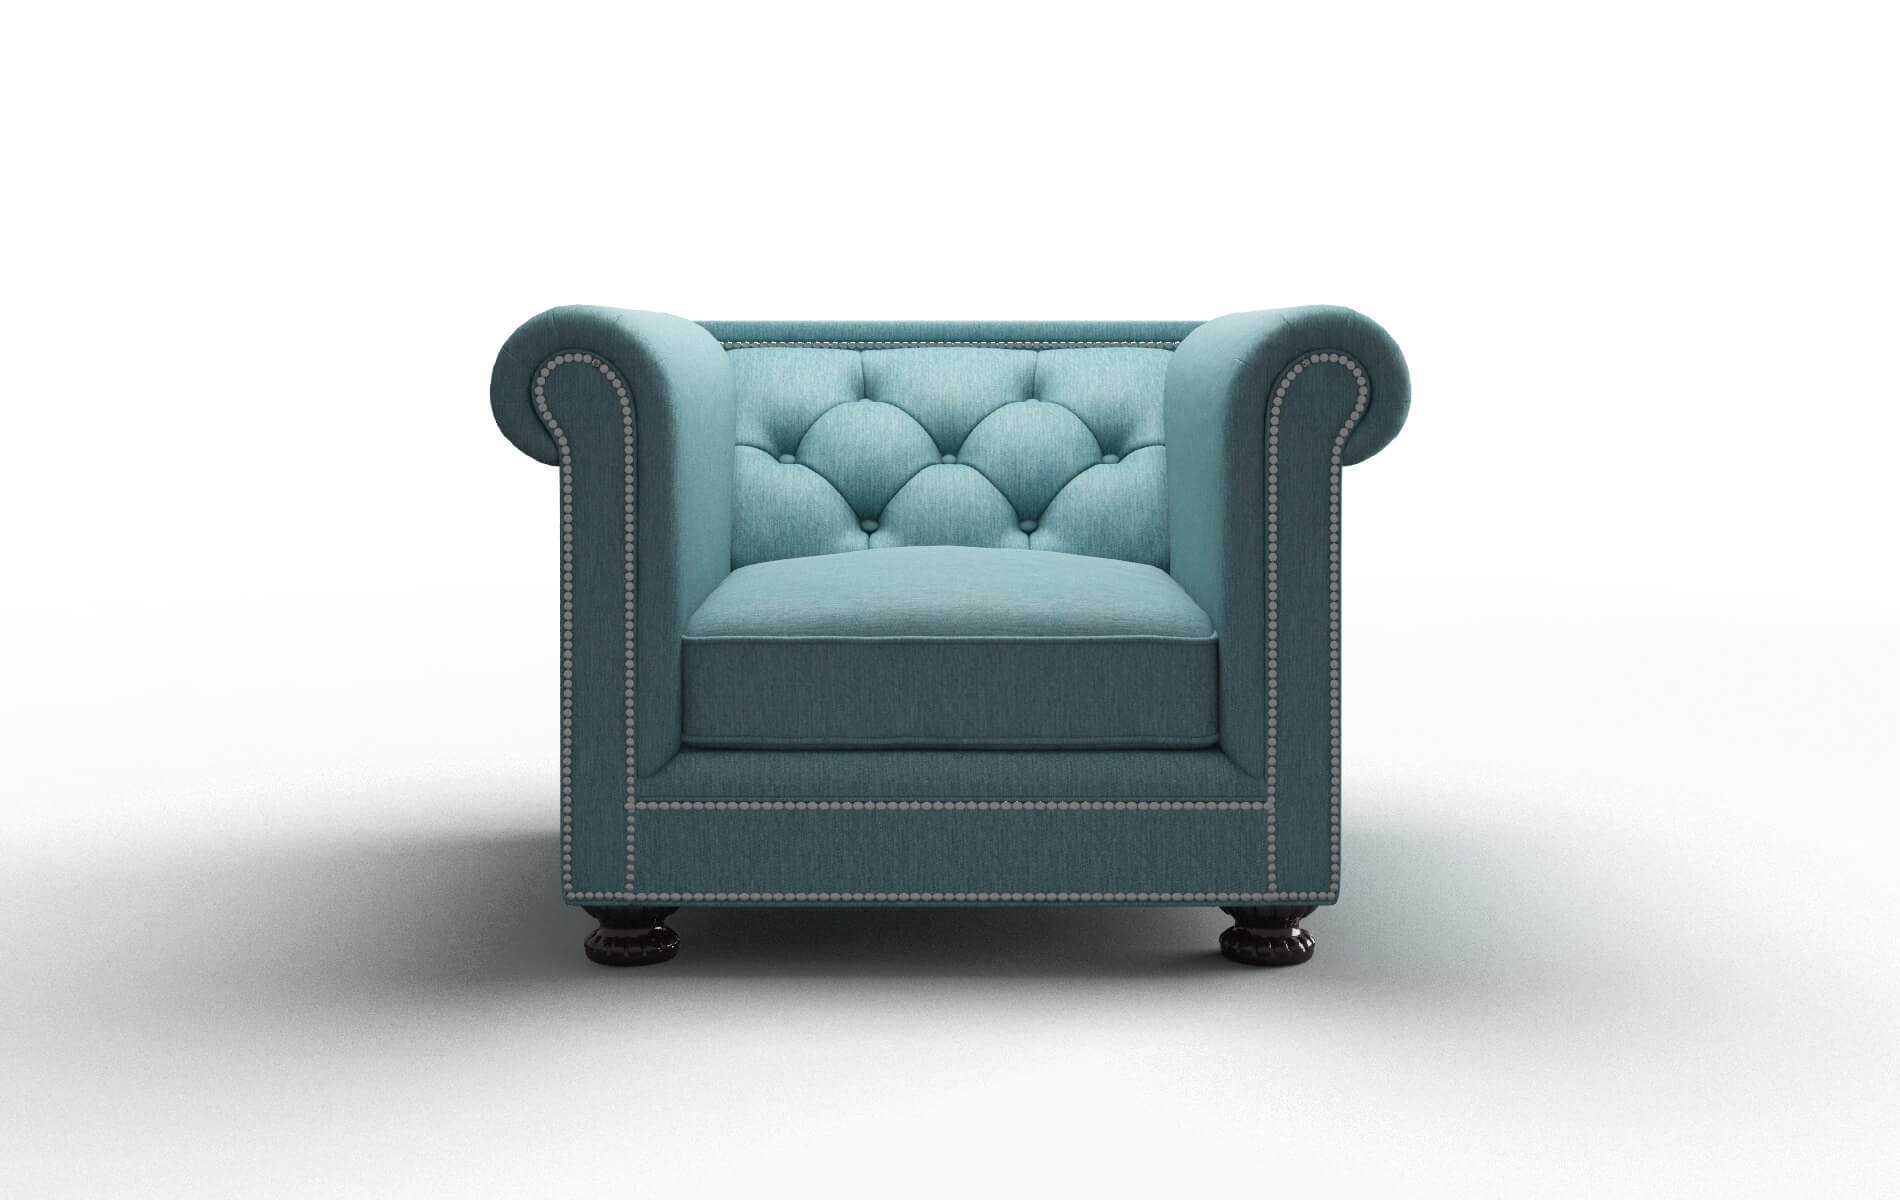 Athens Cosmo Turquoise chair espresso legs